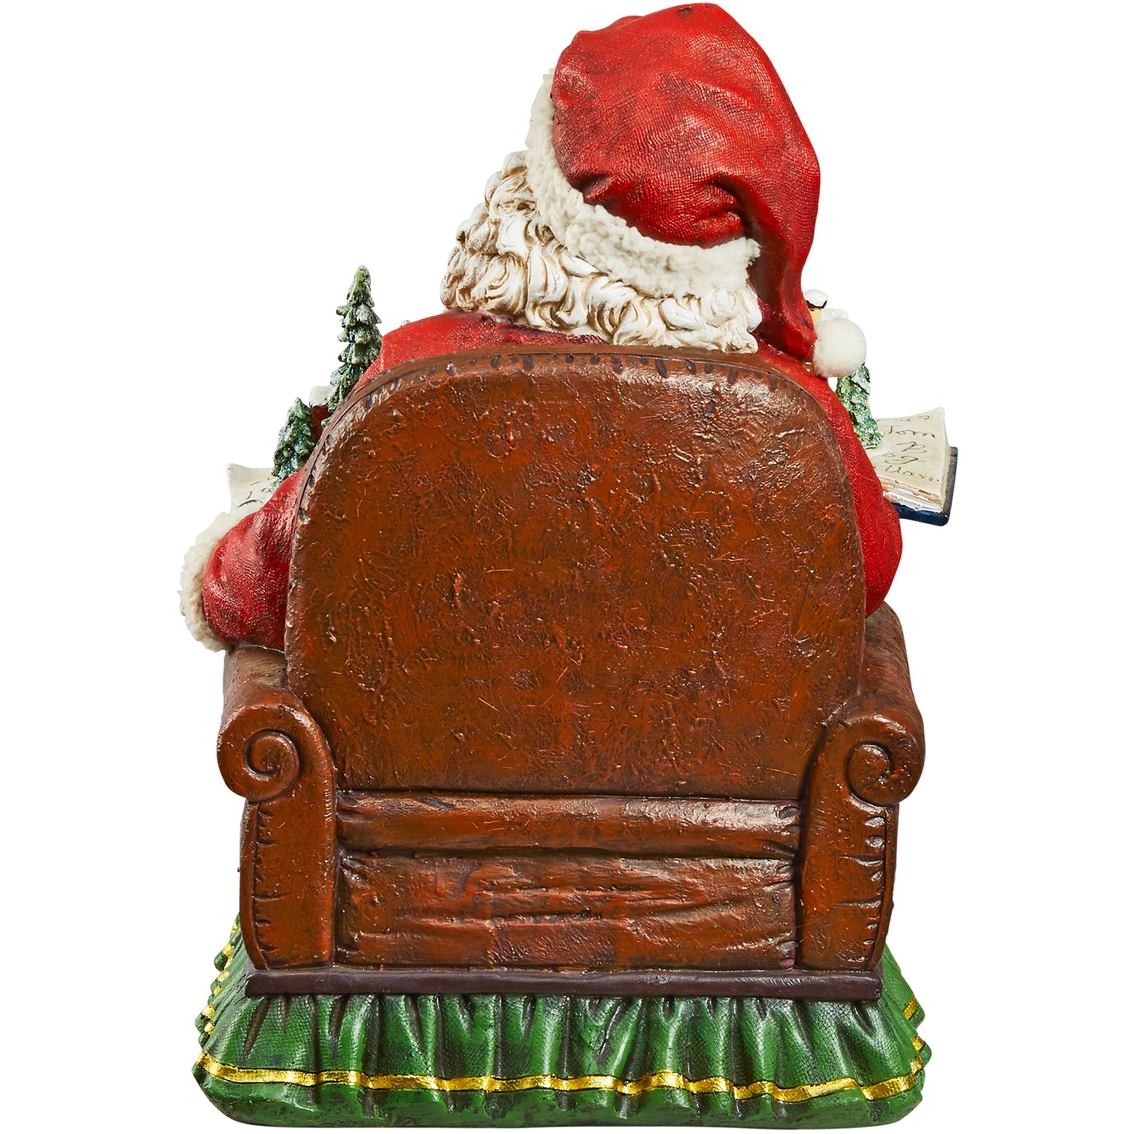 Design Toscano Santa's Coming to Town Holiday Statue - Image 3 of 4